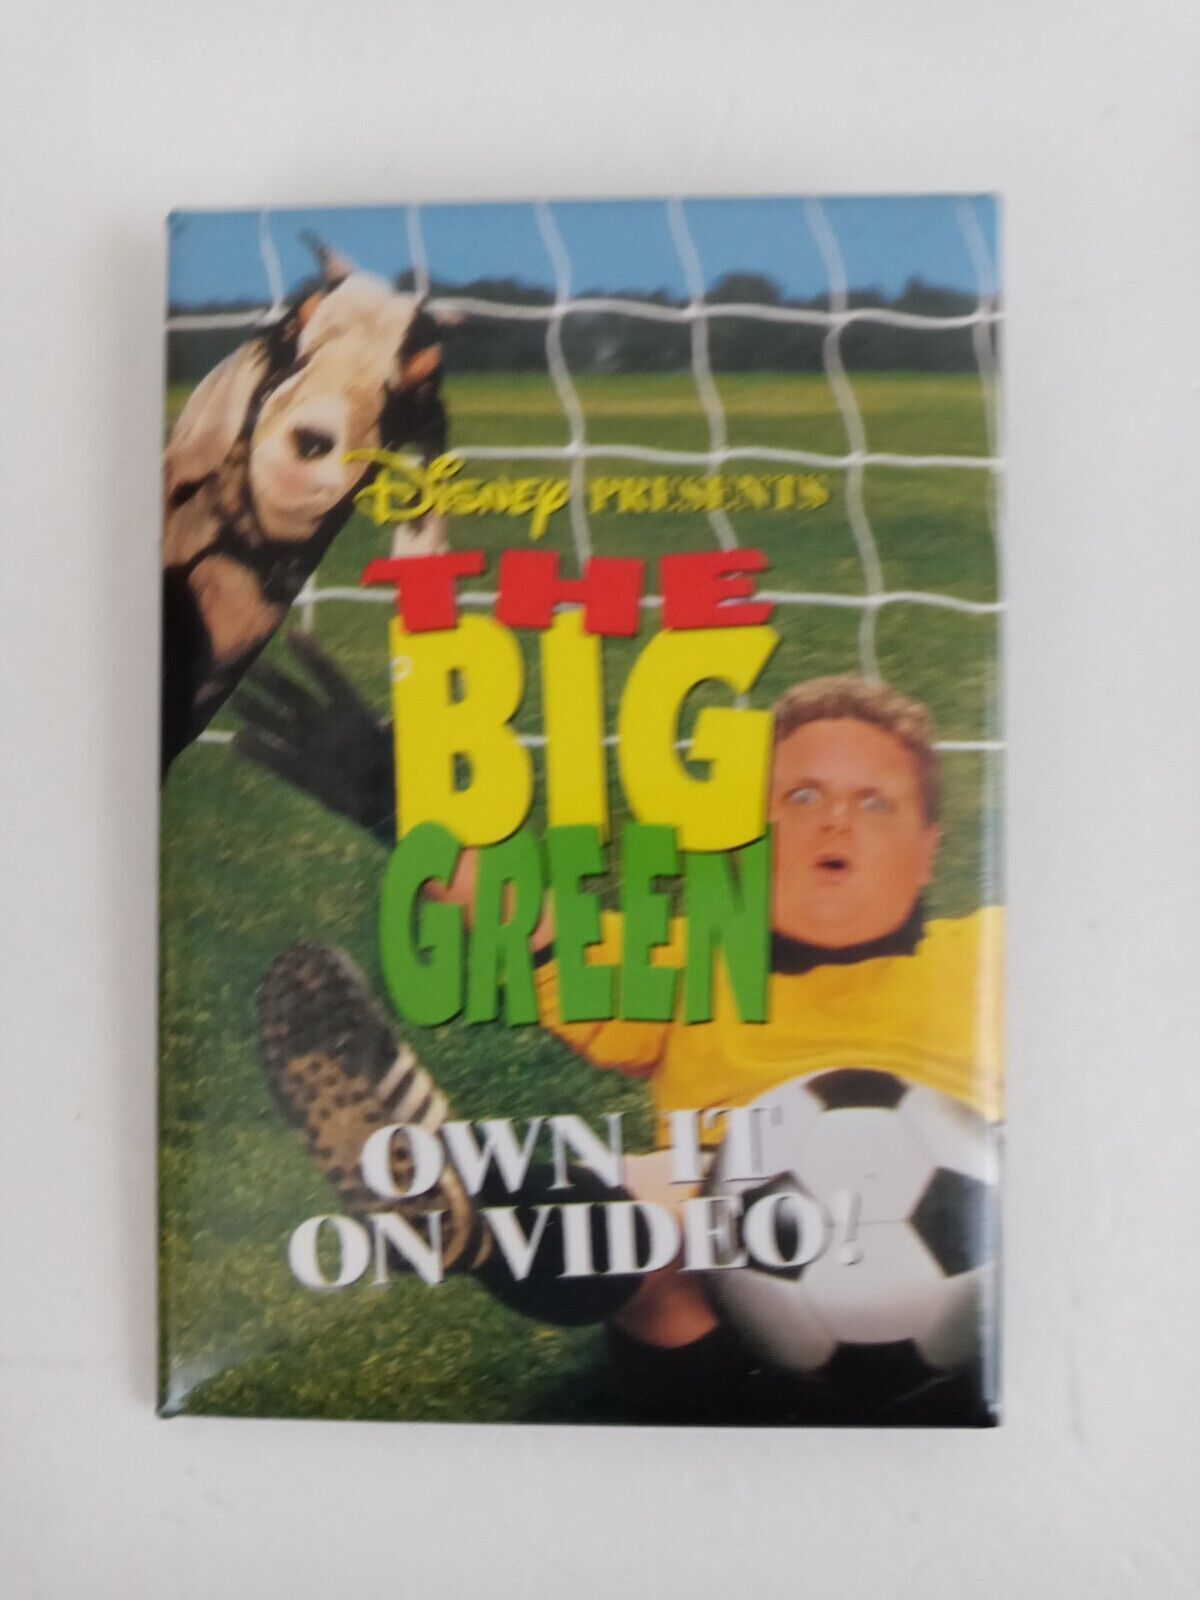 Primary image for Disney Presents The Big Green VHS Movie Promo Pin Button